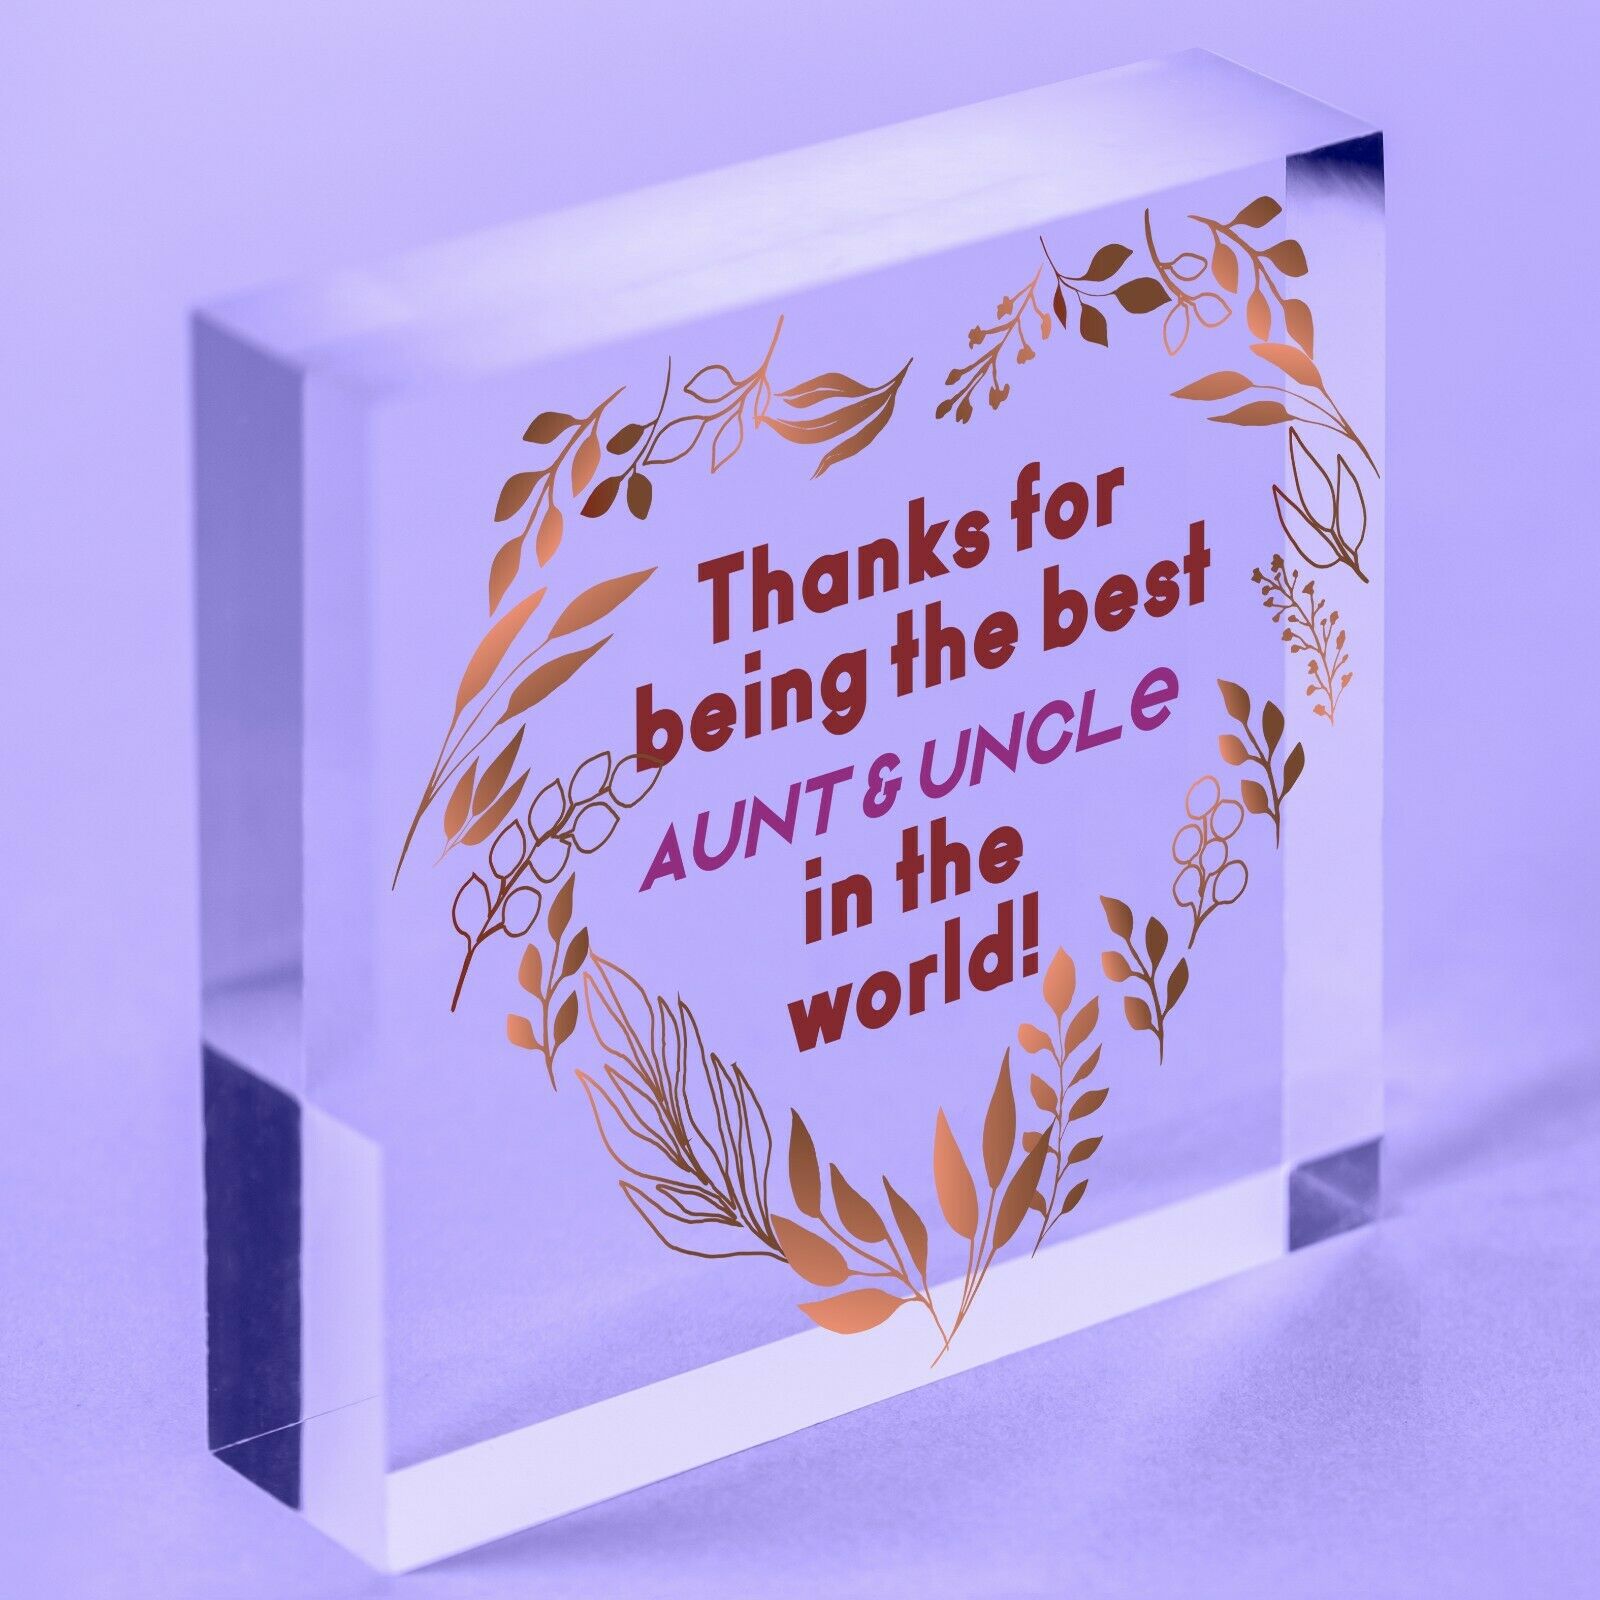 Handmade Gifts For Auntie And Uncle Sign Acrylic Block THANK YOU Gift From Niece